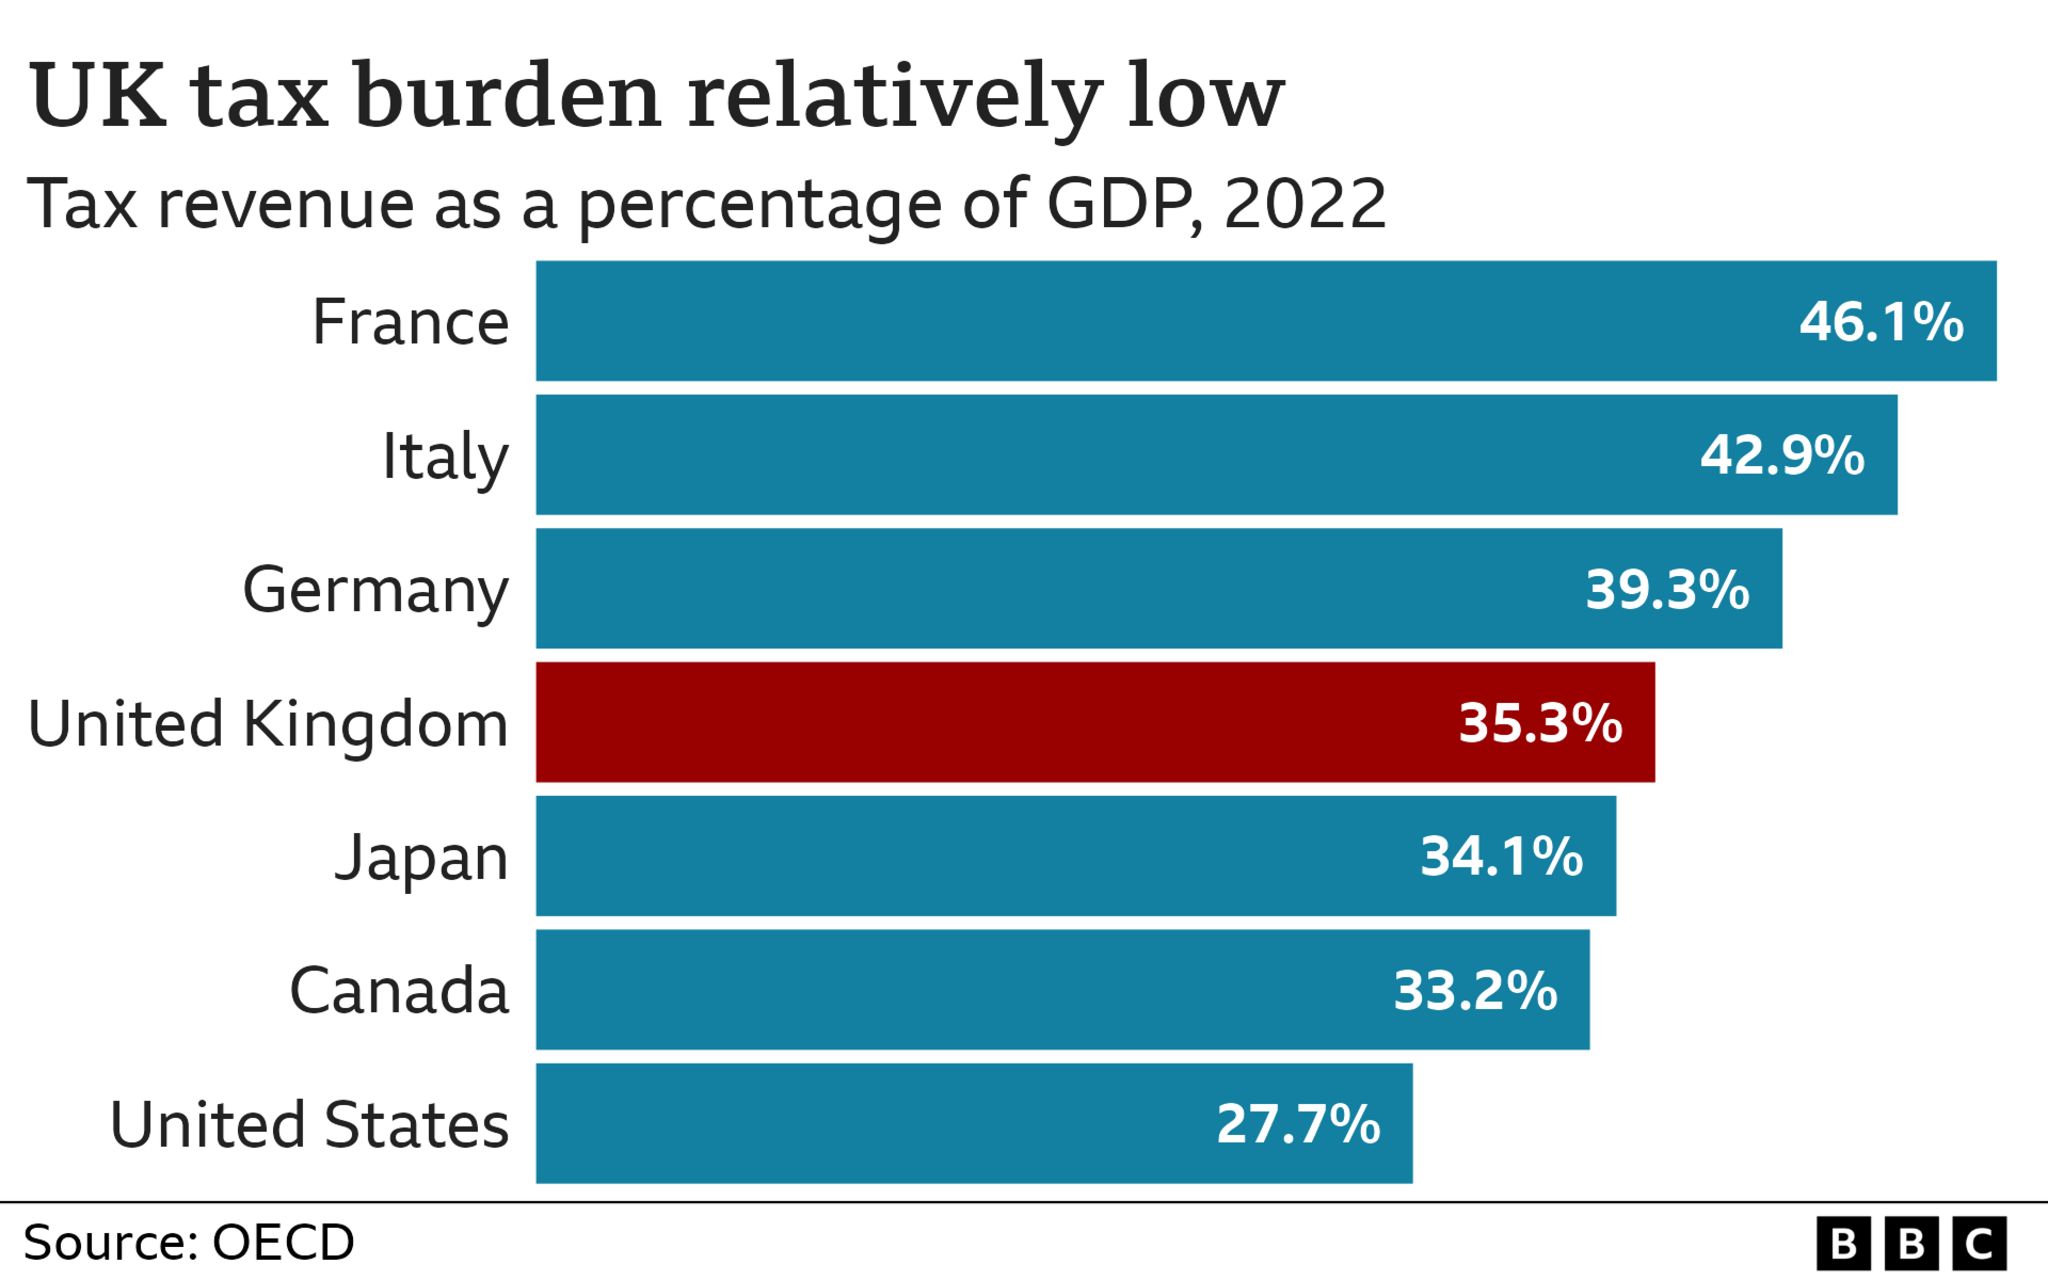 Bar chart showing tax revenue as a percentage of GDP. The United Kingdom's tax burden is relatively low compared to other advanced economies, with a value of 35.3% in 2022.